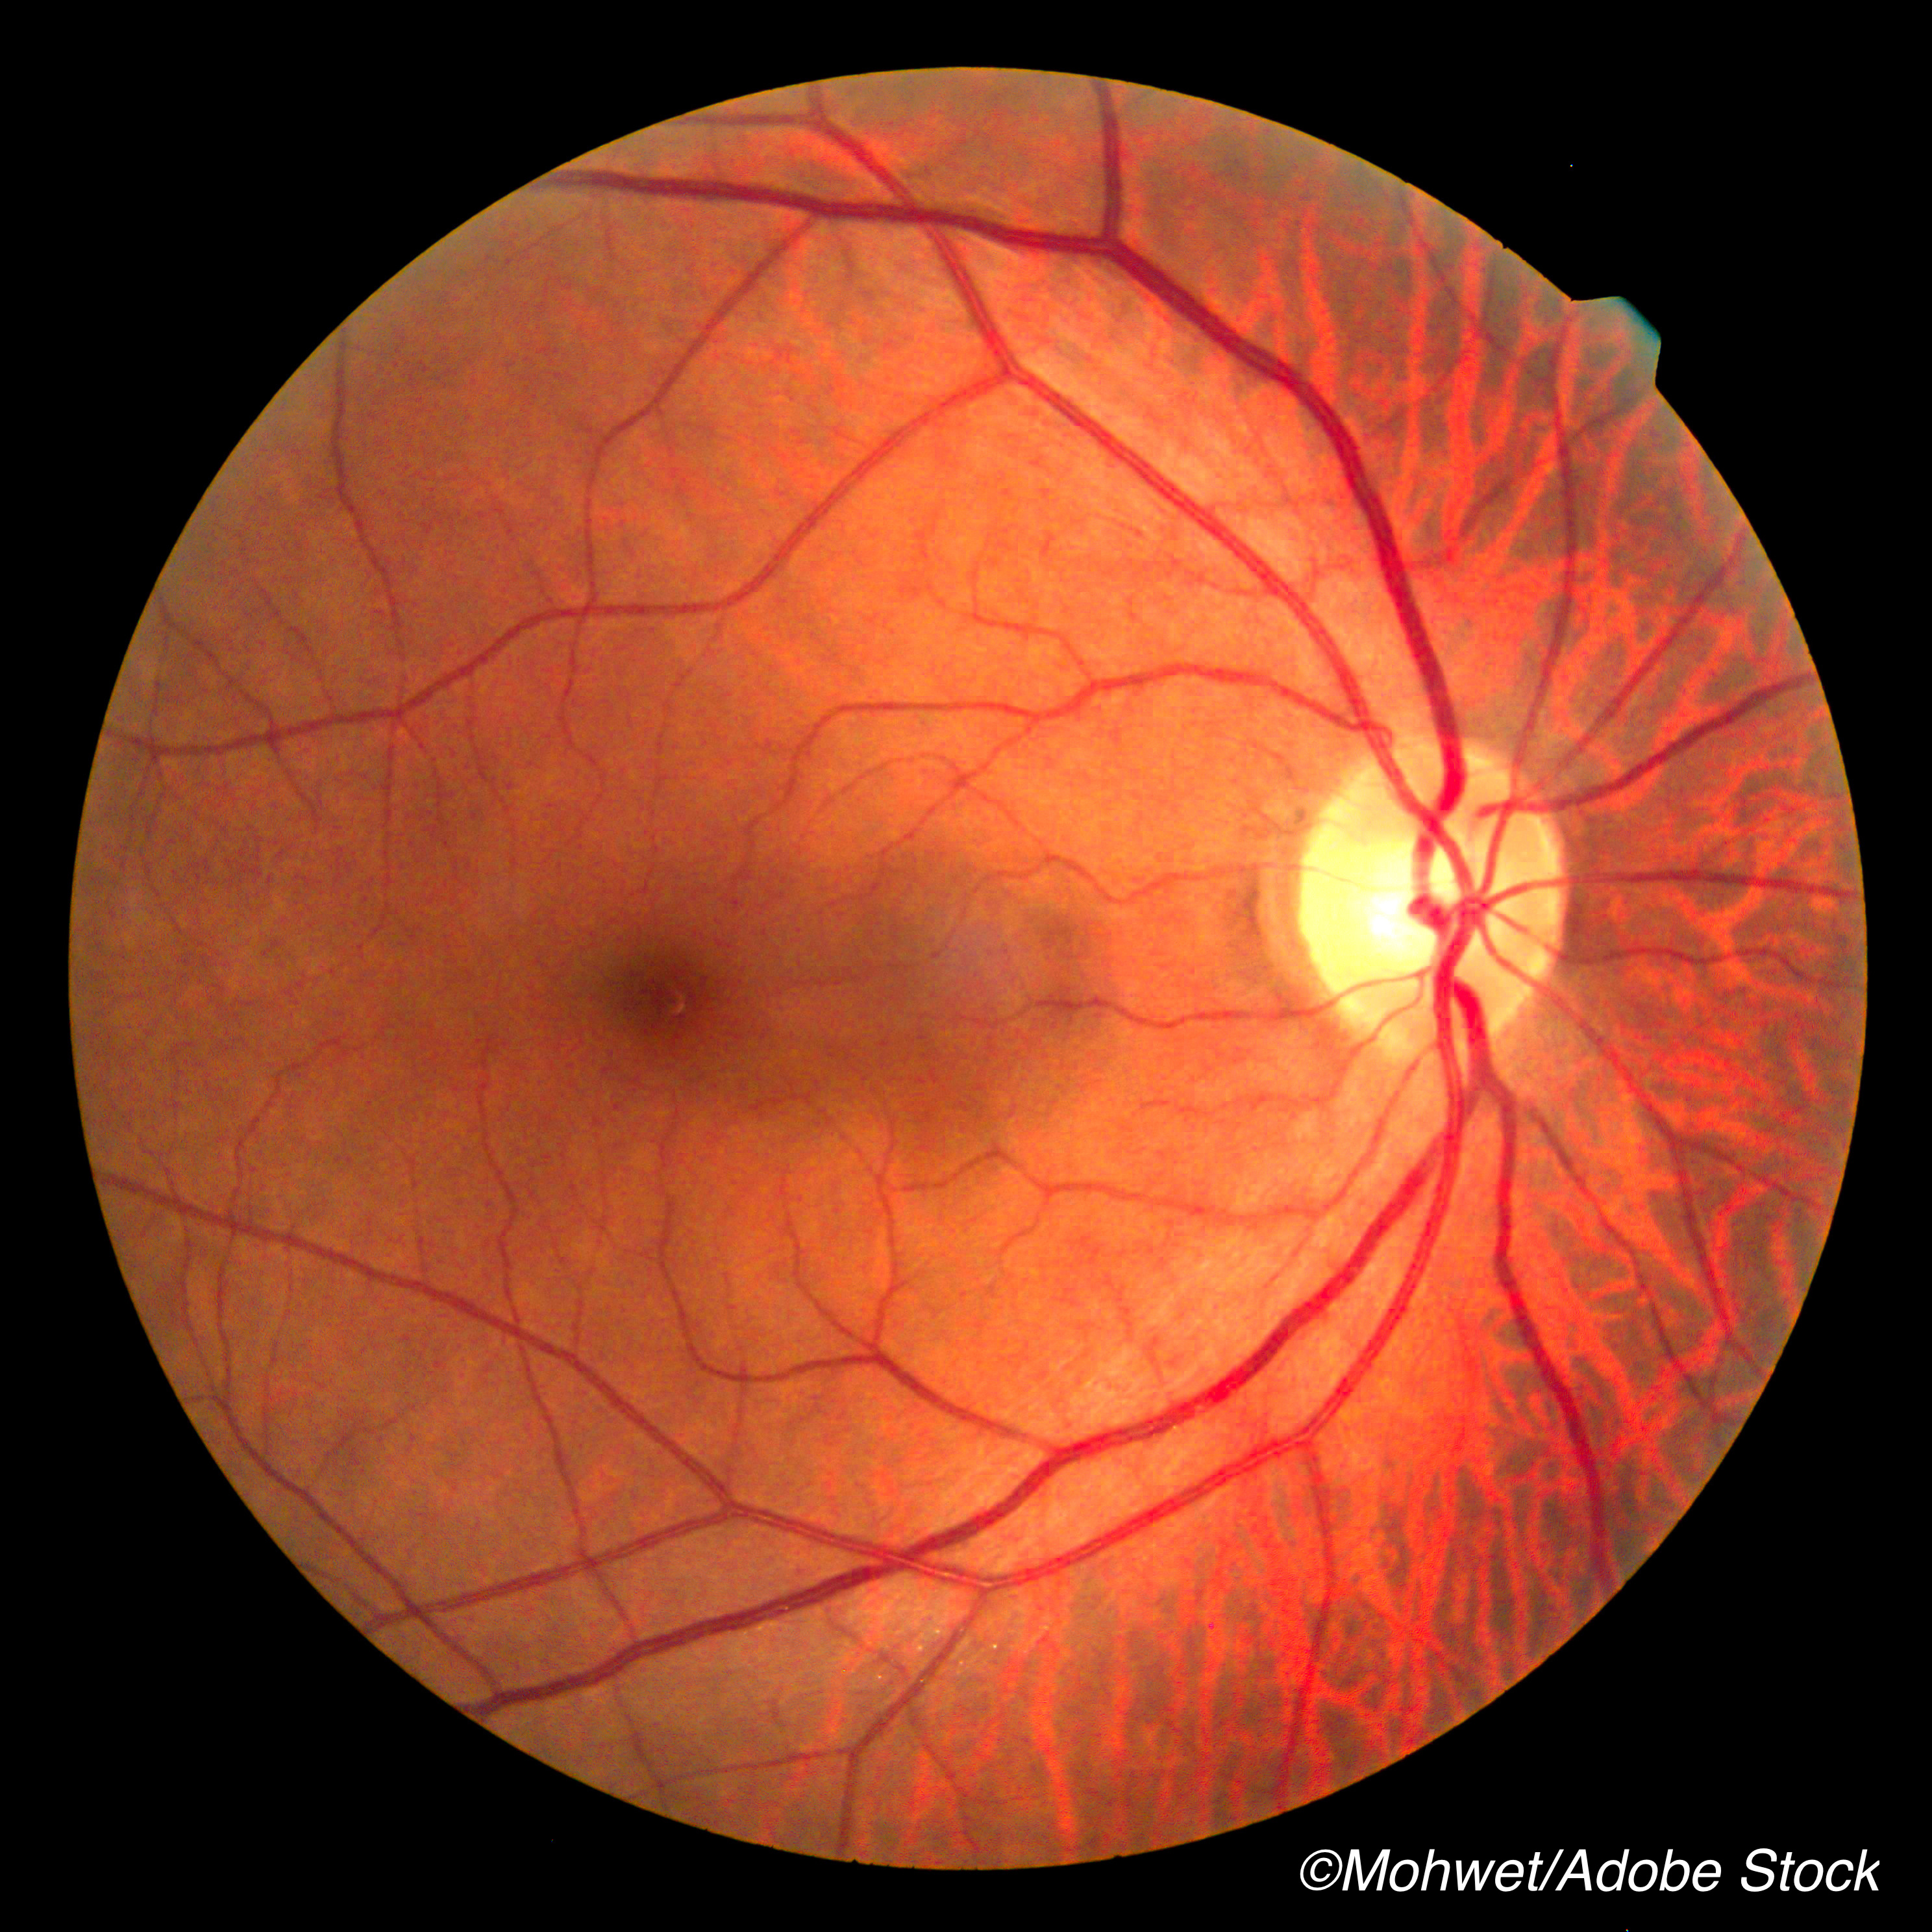 Retinal Thinning Portends Sickle Cell Retinopathy